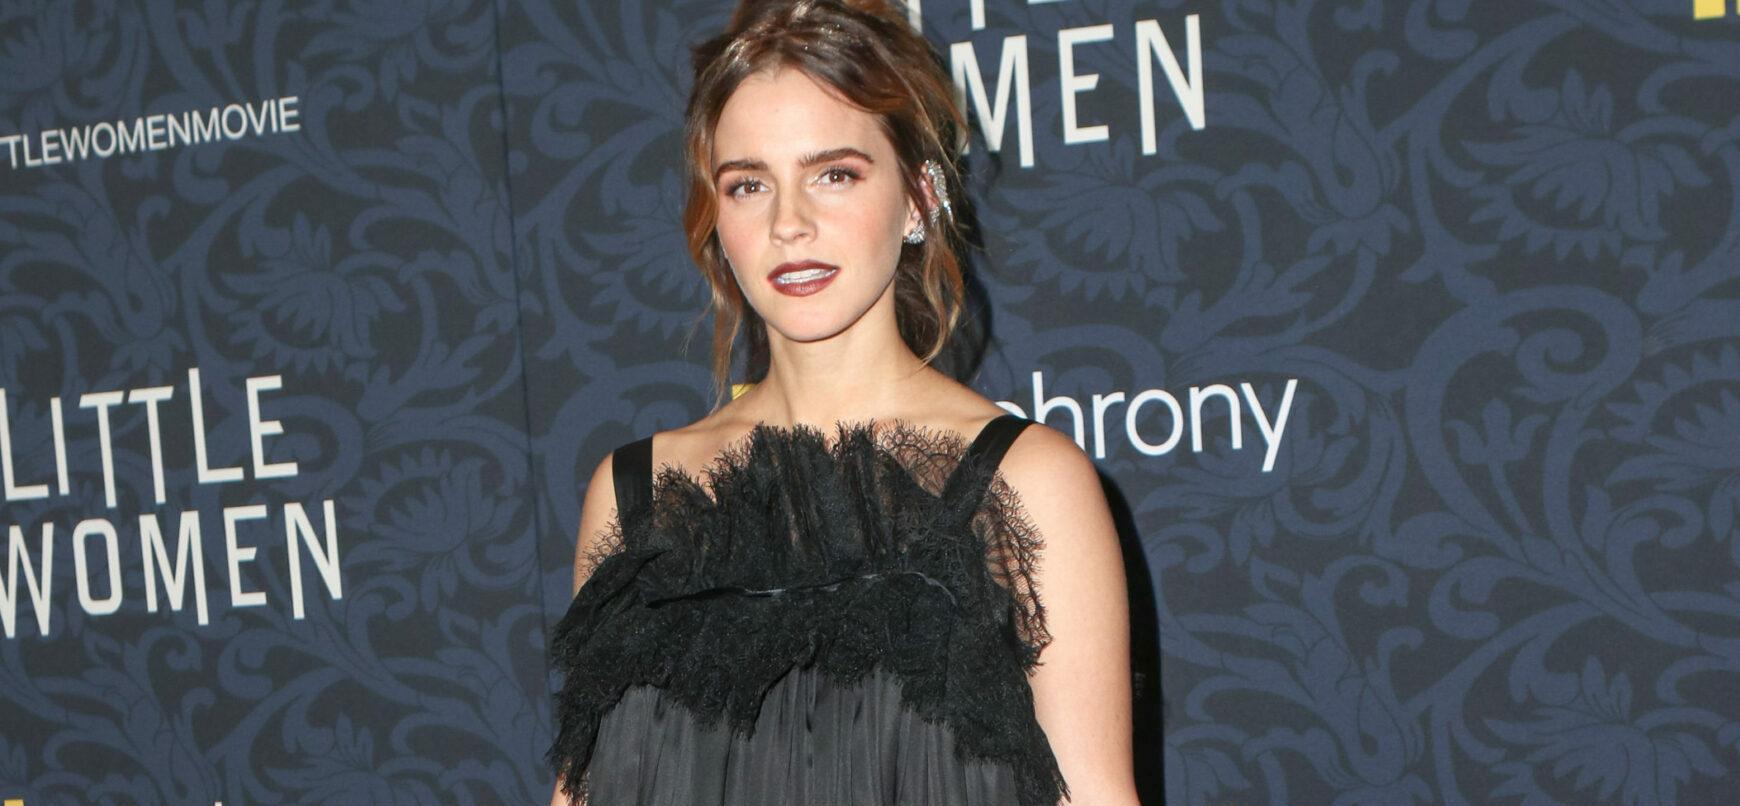 The REAL Reason Why Emma Watson Took A Break From Hollywood: ‘I Felt A Bit Caged’